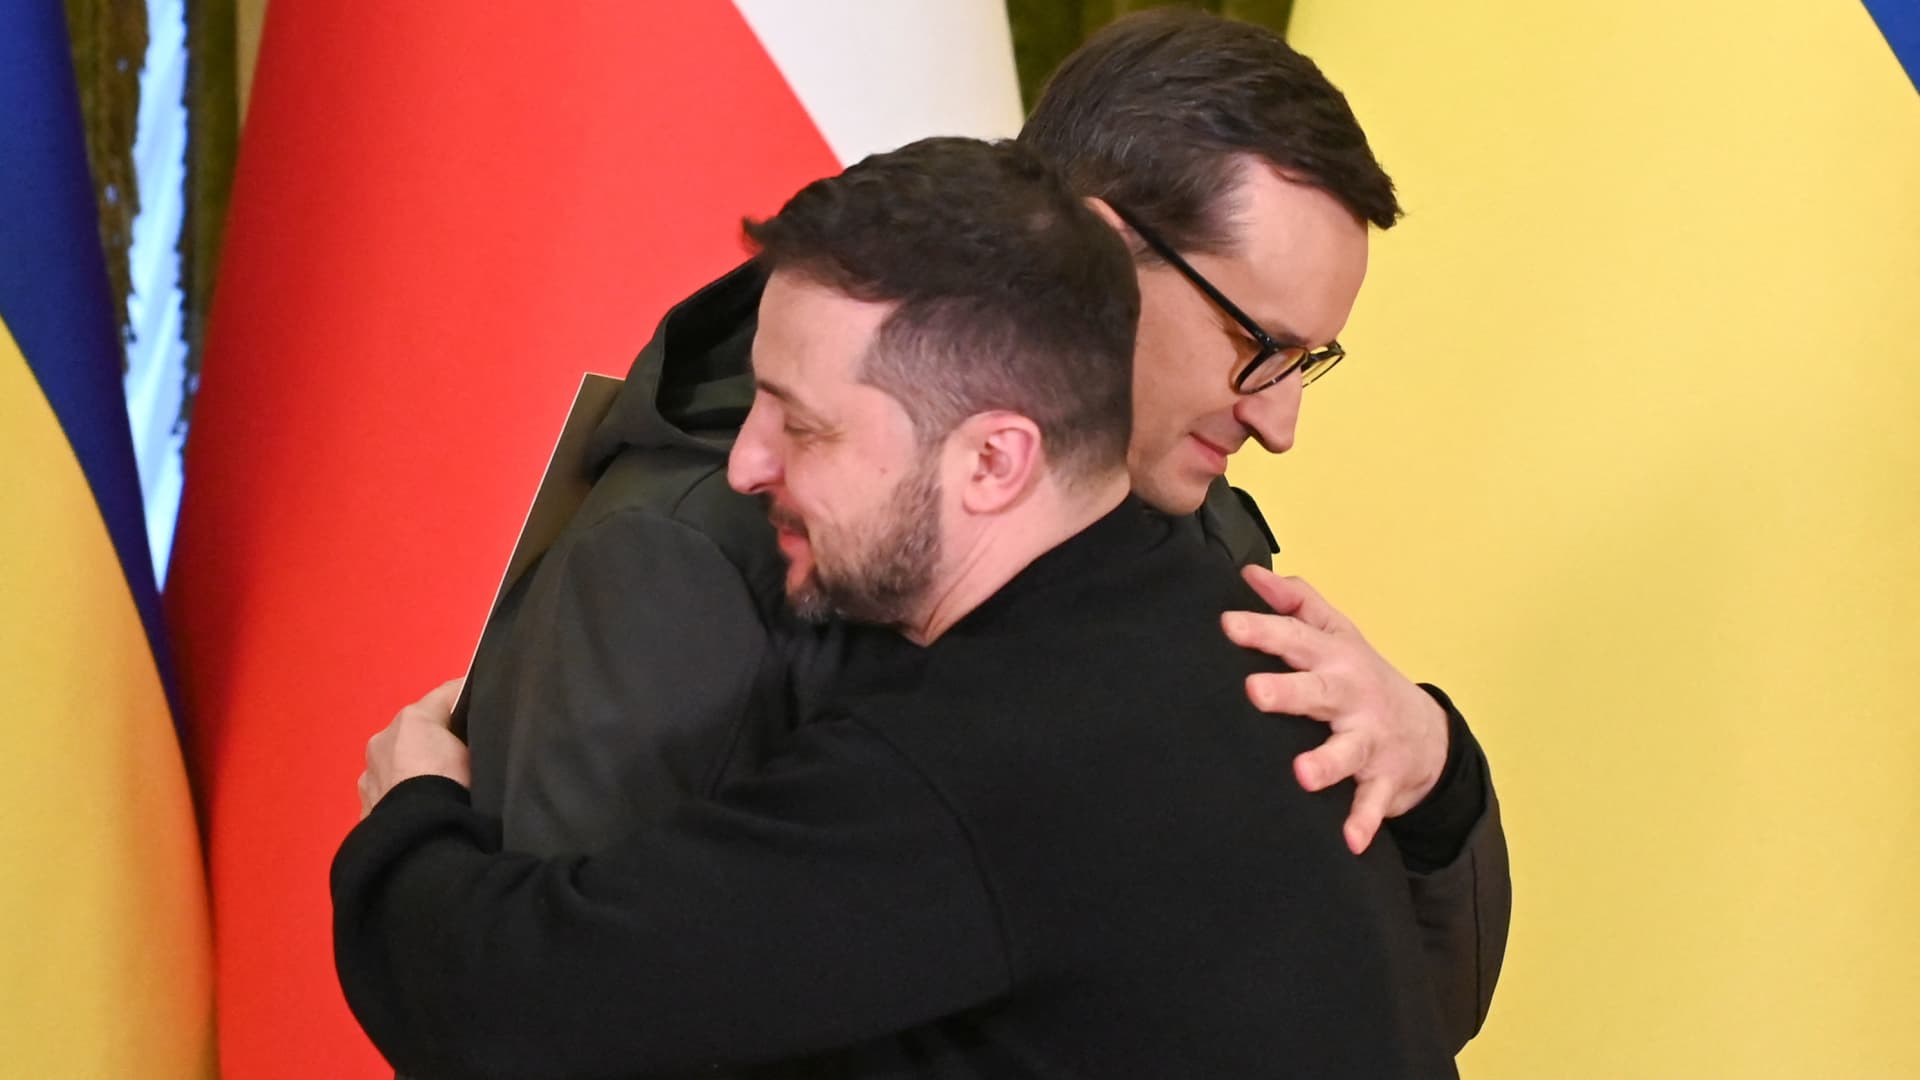 In happier times: Ukraine's President Volodymyr Zelensky and Polish Prime Minister Mateusz Morawiecki embrace during a joint news briefing on a day of the first anniversary of Russia's attack on Ukraine, in Kyiv, Ukraine February 24, 2023.